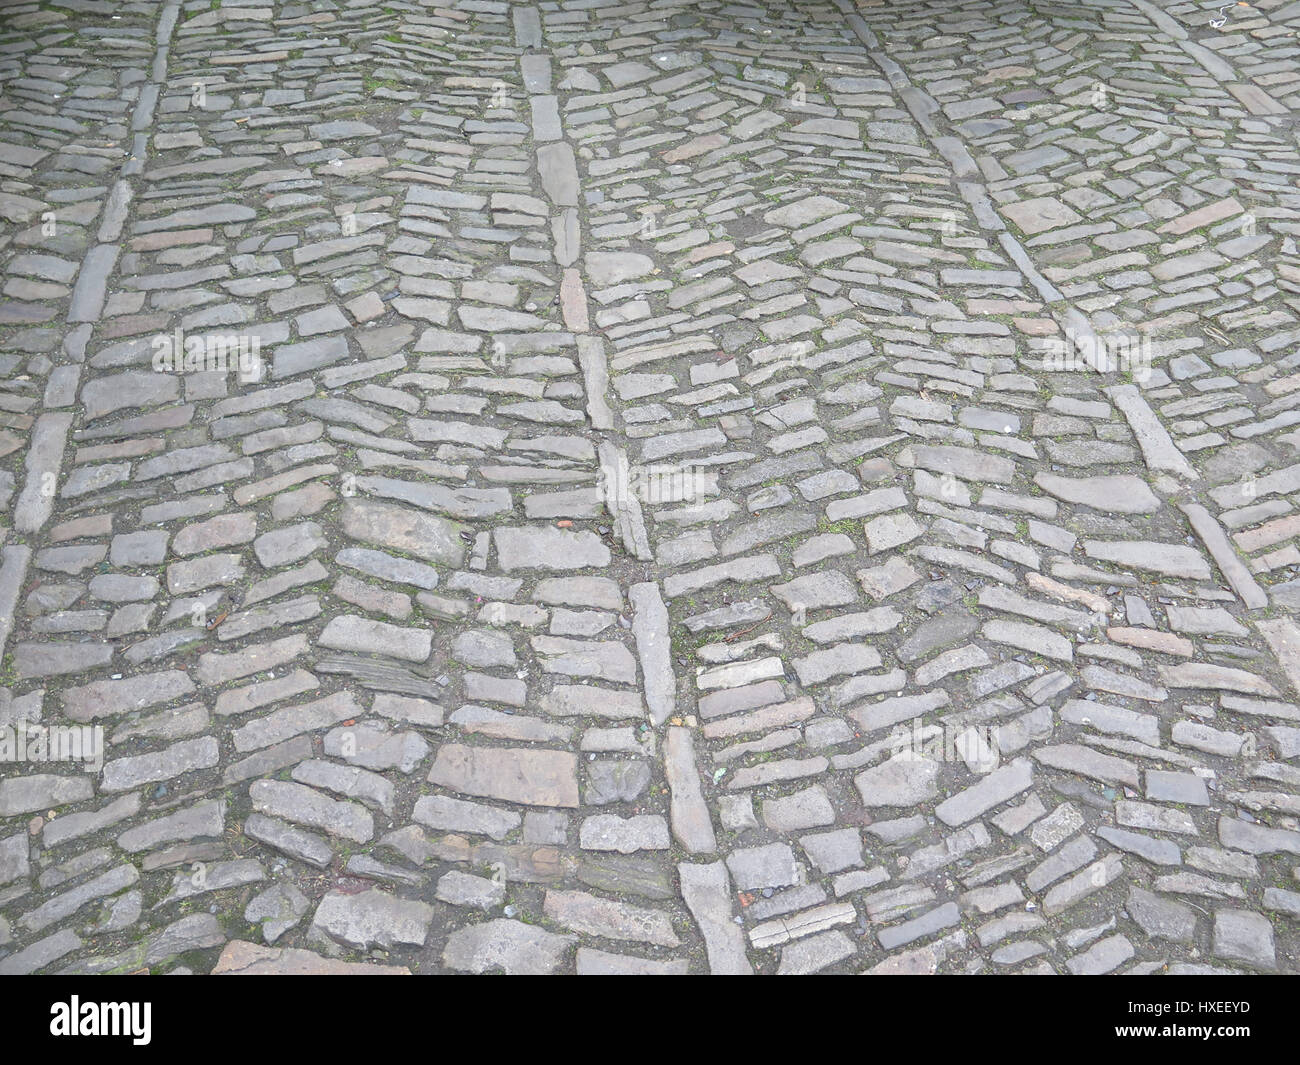 Irregular Cobble Stone pattern in town square in Munster, Germany Stock Photo